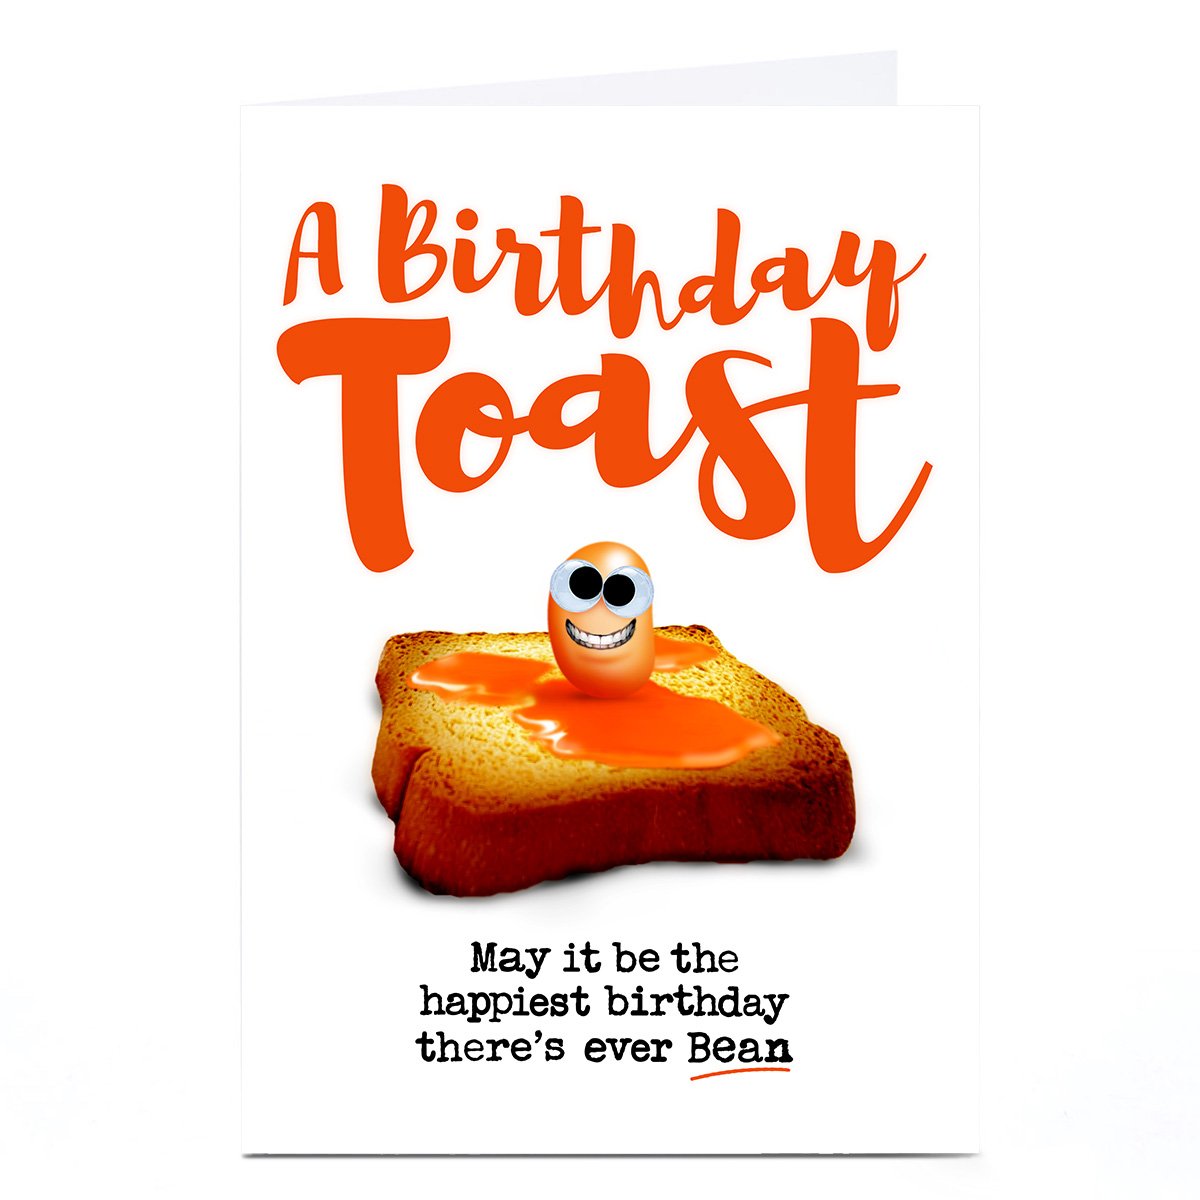 Personalised PG Quips Birthday Card - A Birthday Toast